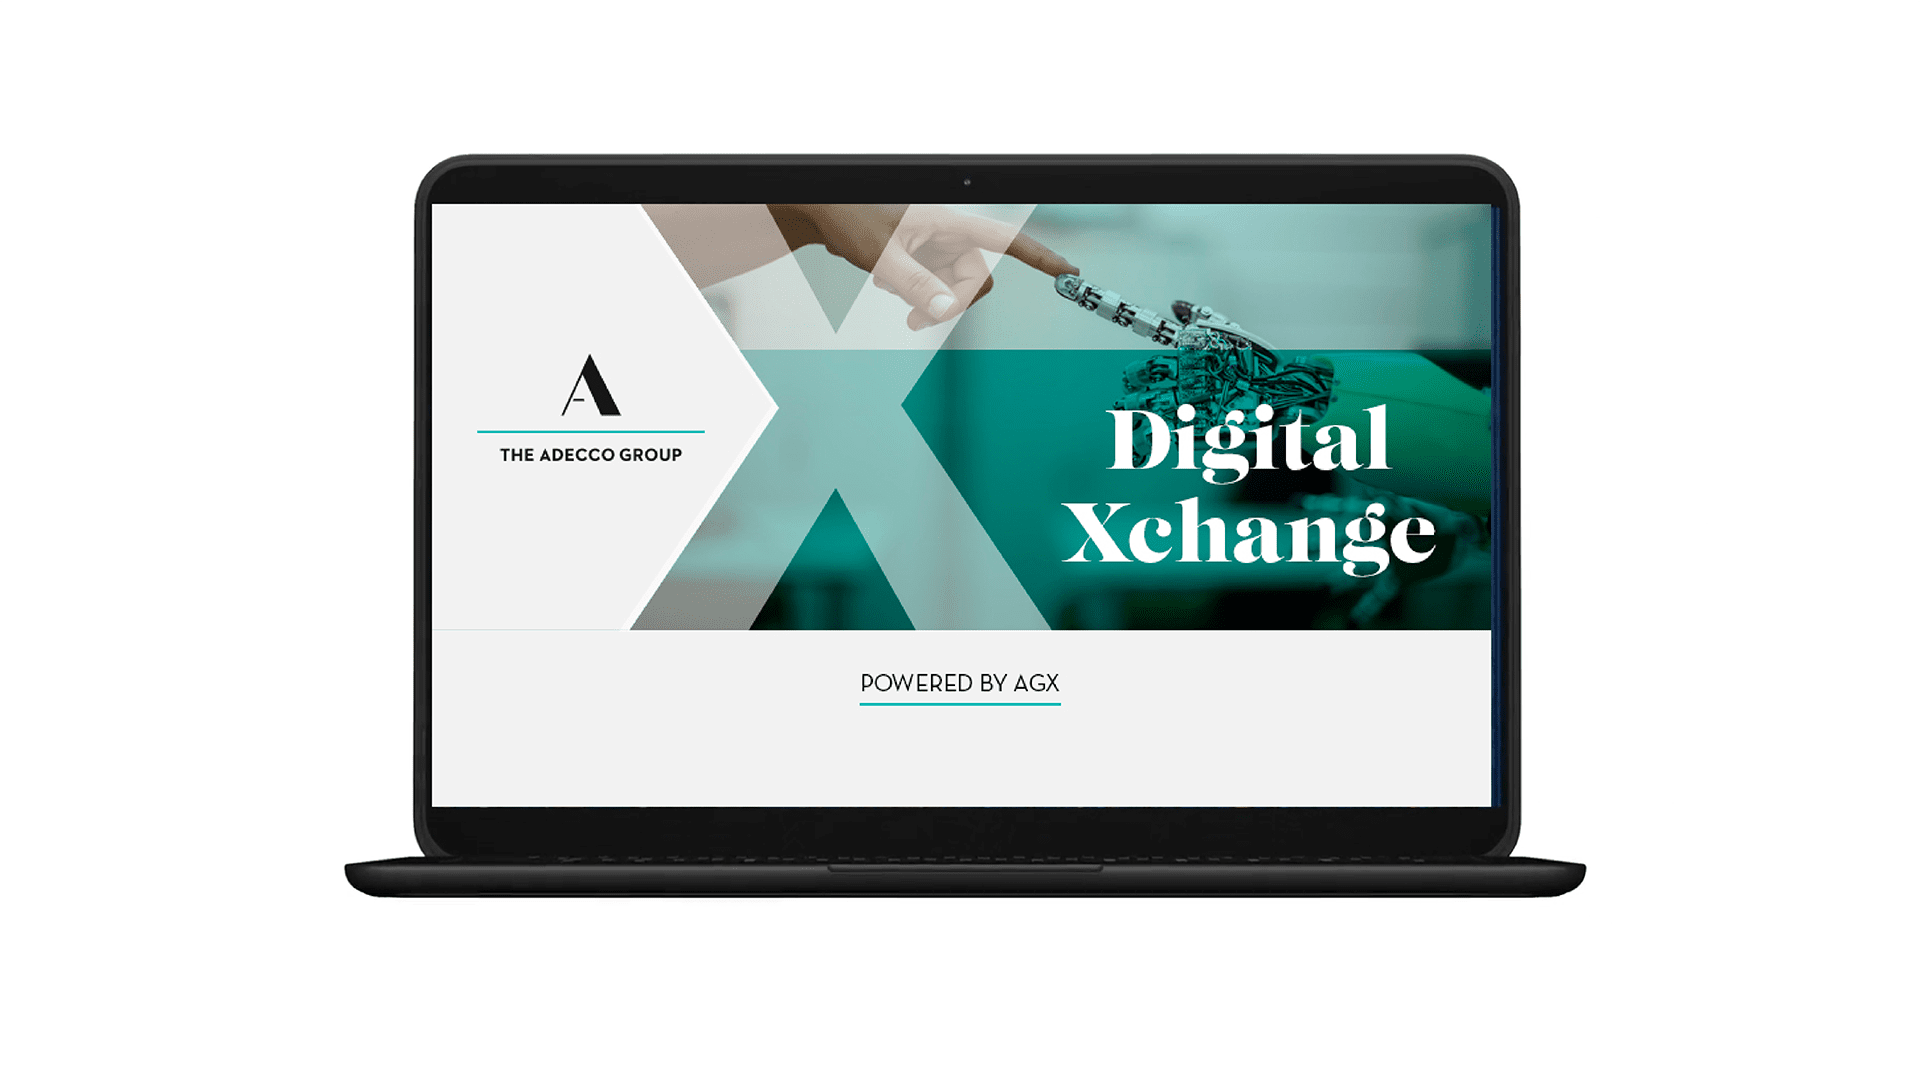 An image of a laptop displaying the Adecco Group AGX Digital Xchange Report Cover